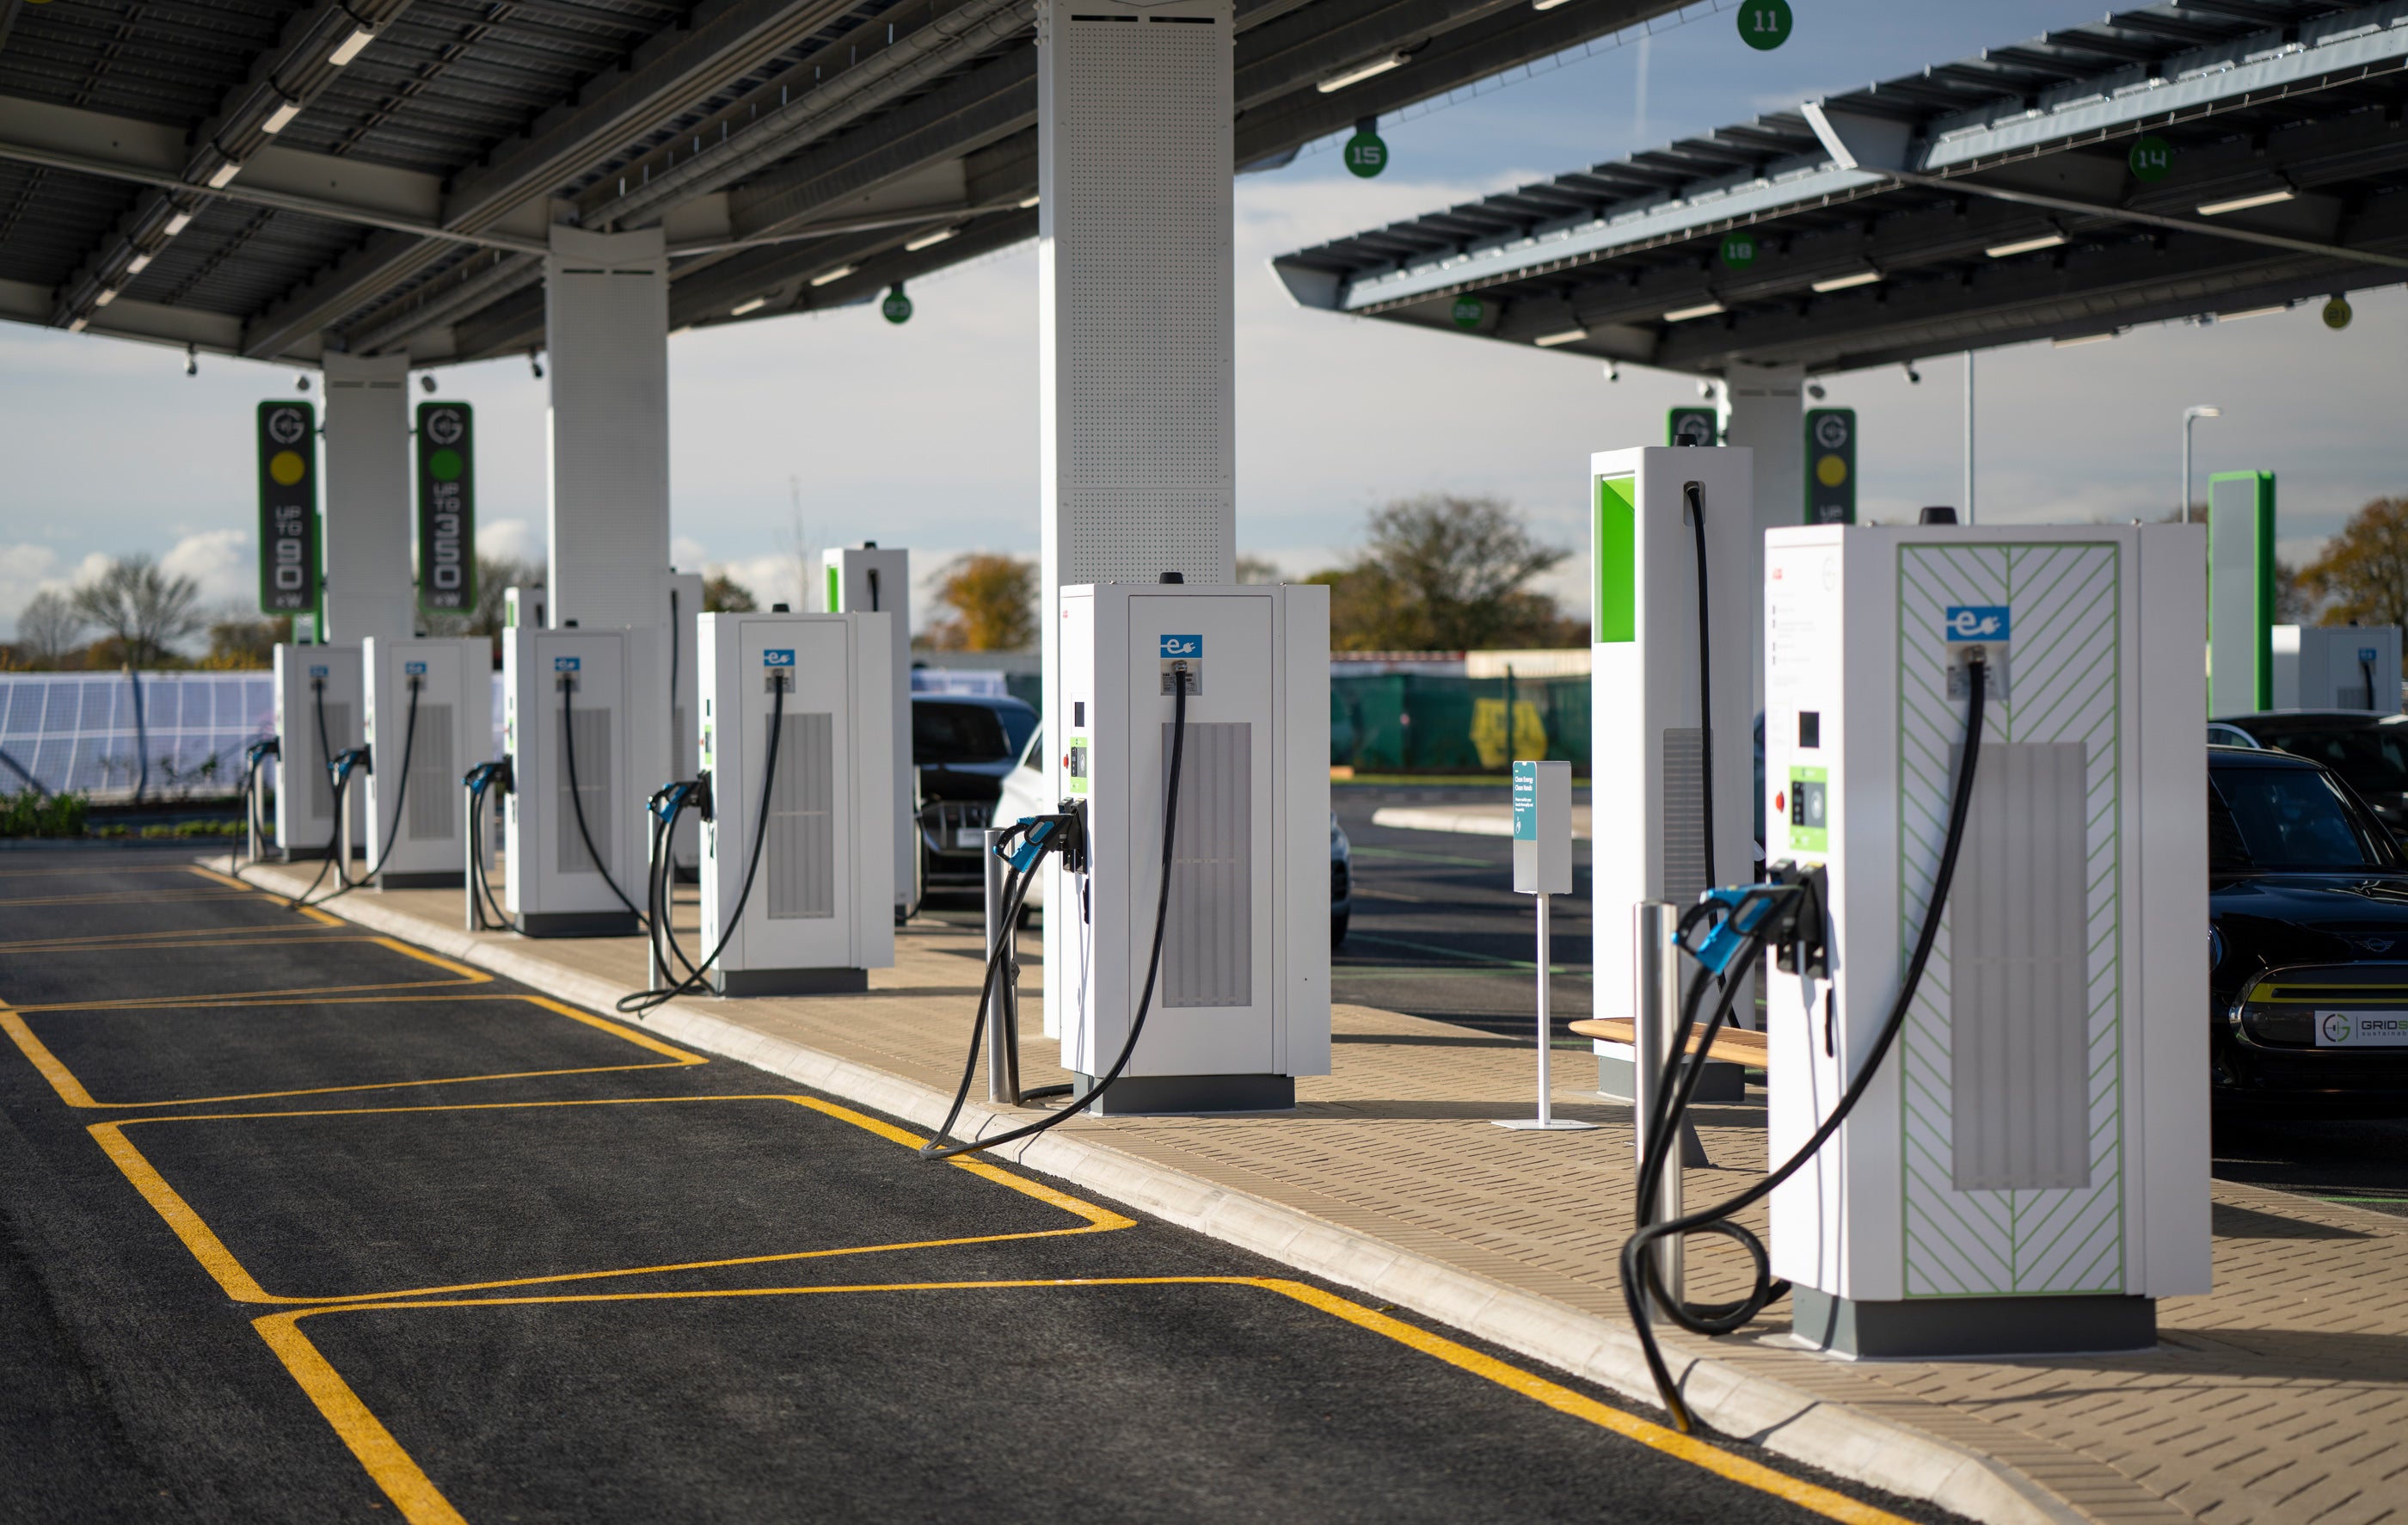 Eelectric Chargers at the Gridserve Electric Forecourt. (Gridserve, PA)